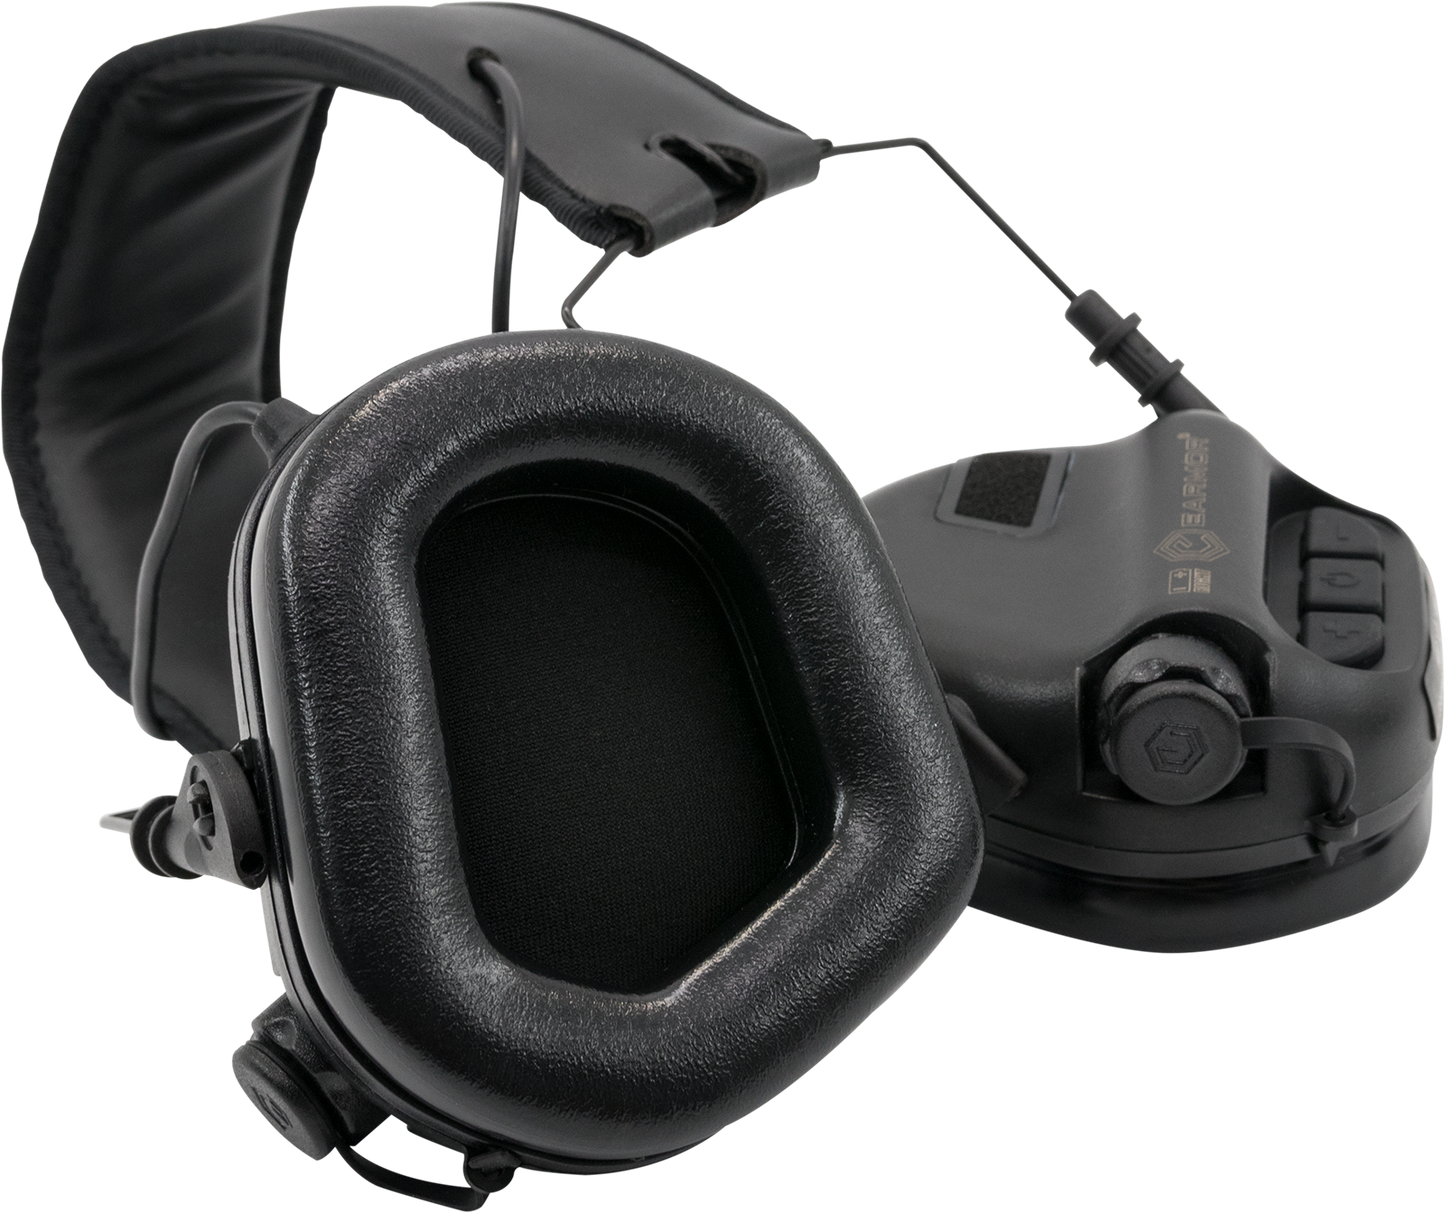 Electronic Hearing Protection Earmuffs With AUX input function